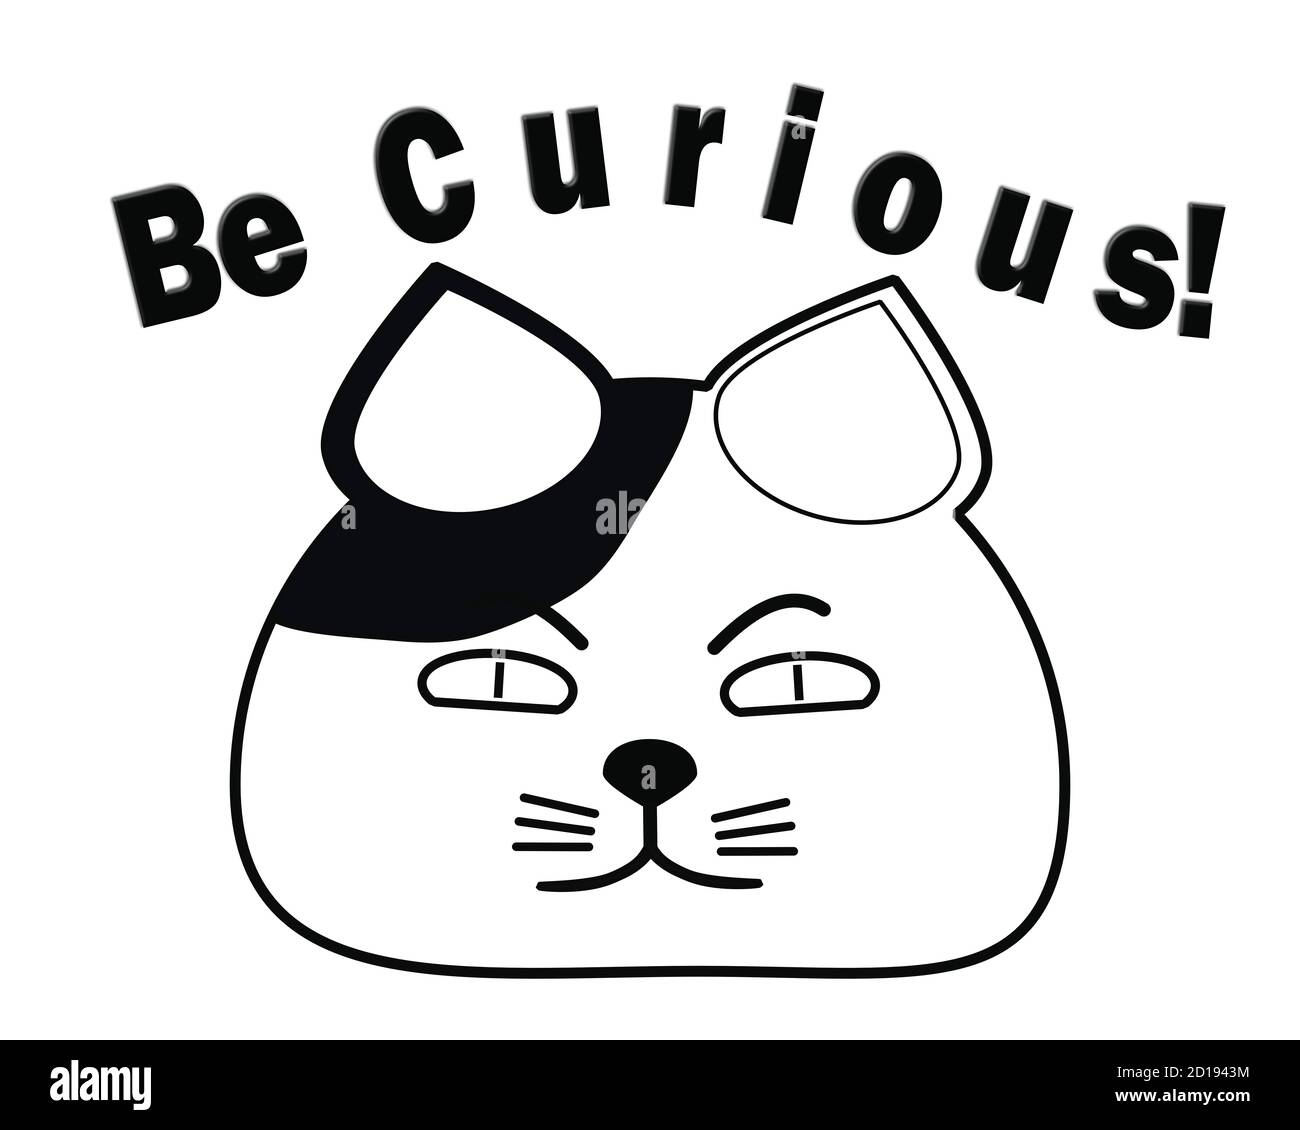 Curious Cat  - Education concept illustration depicts fat cat with insatiable curiosity for learning. Stock Photo